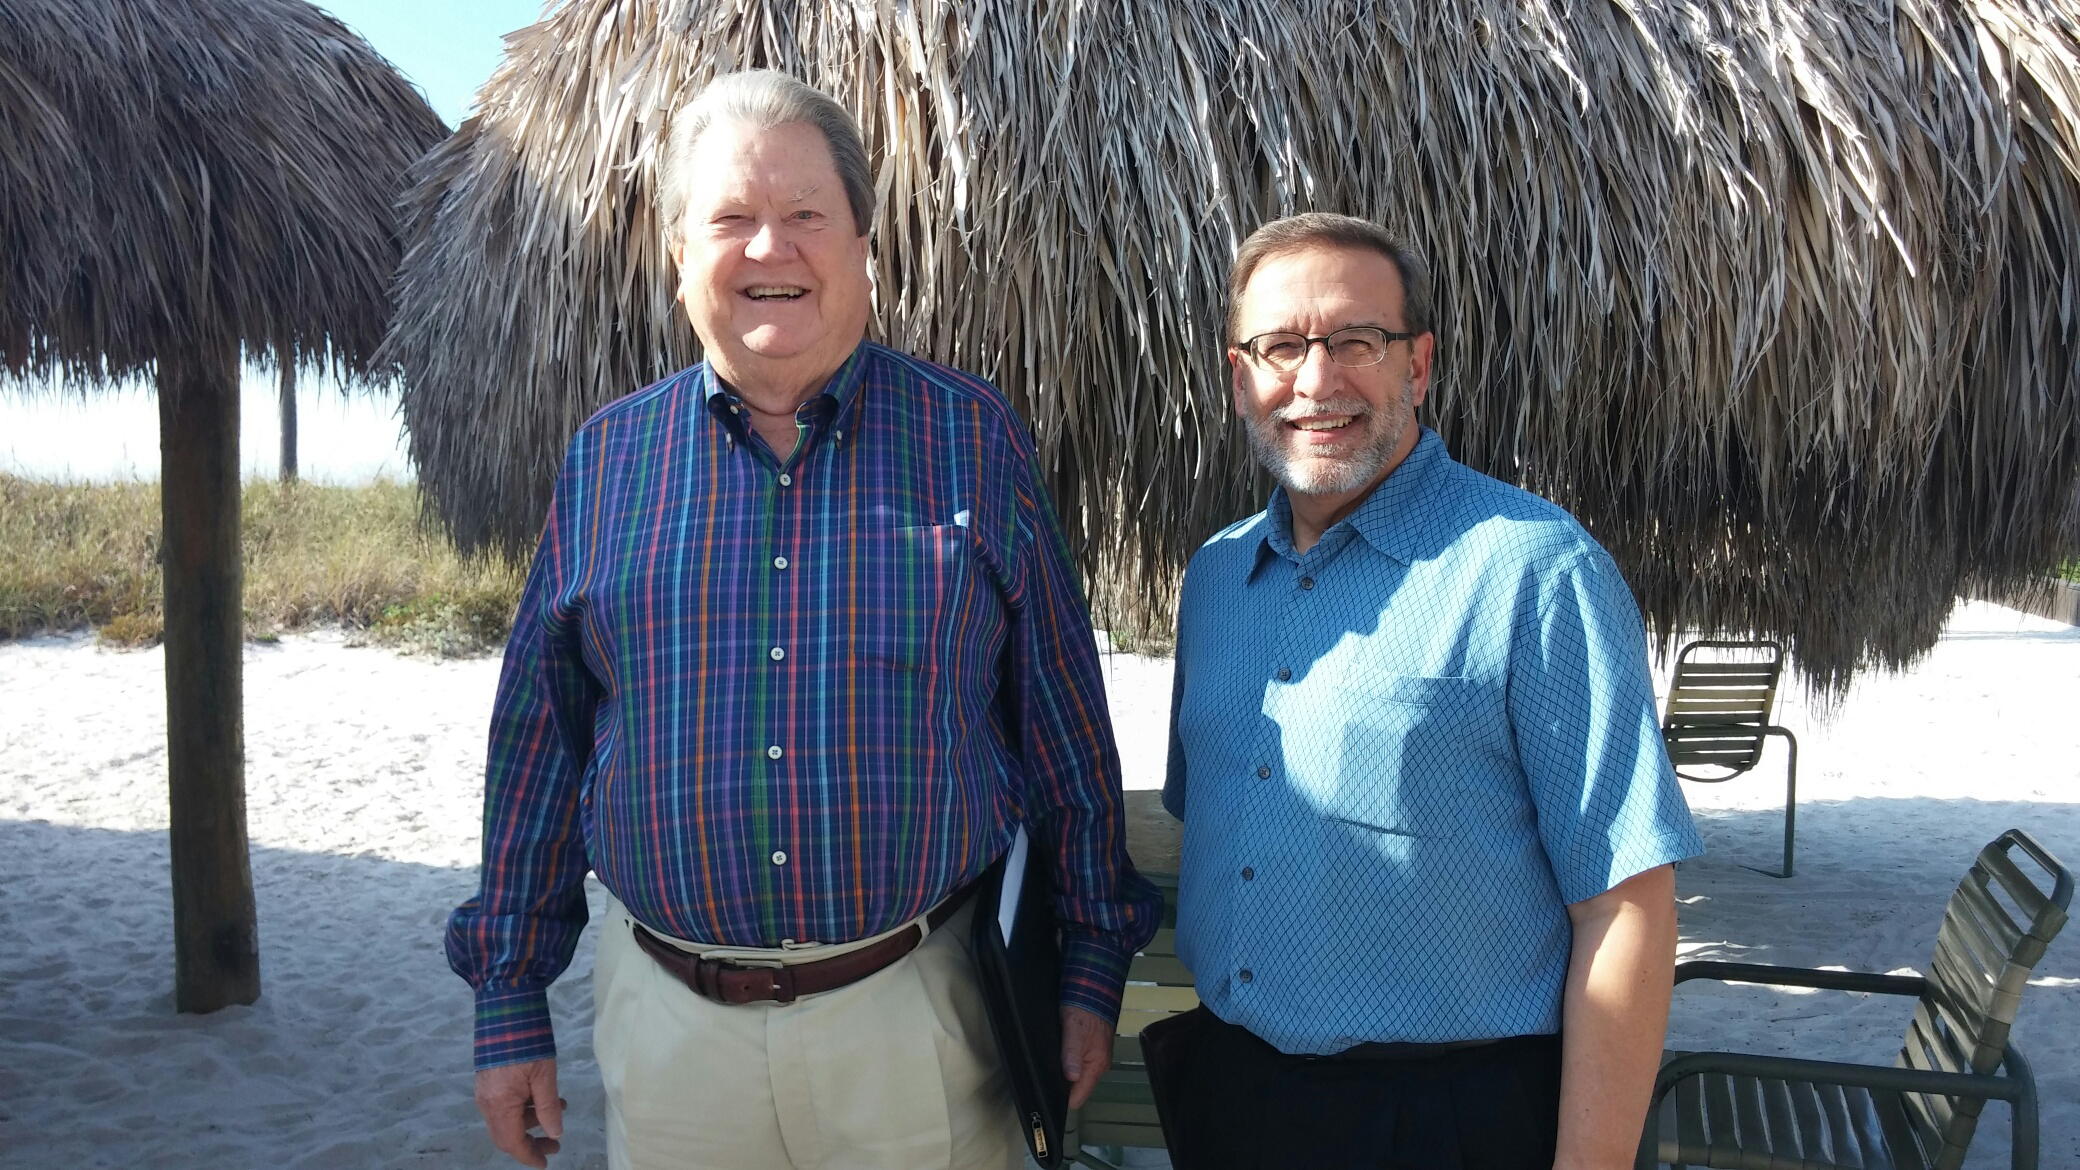 Hogarth meets with Lee Crockett, director of fish policy at The Pew Charitable Trusts, in St. Petersburg, Fla., in January 2015.